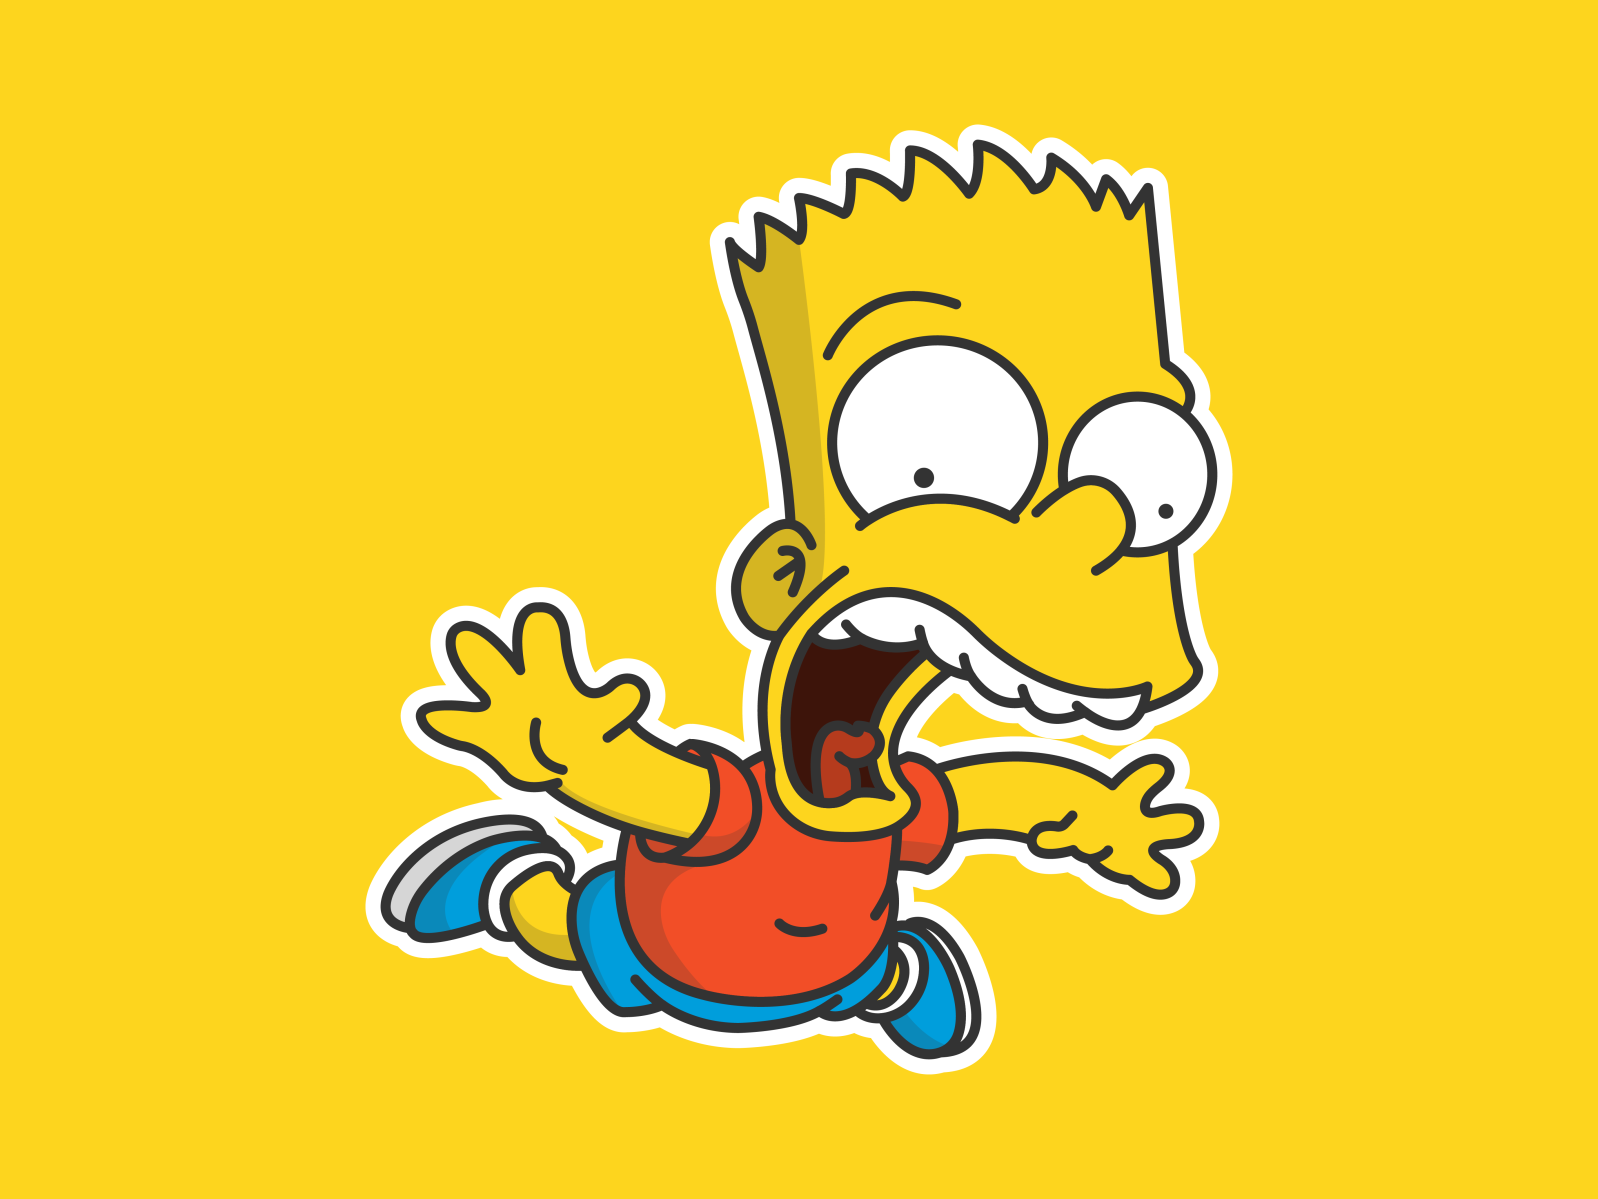 Bart Simpsons by iconarie on Dribbble